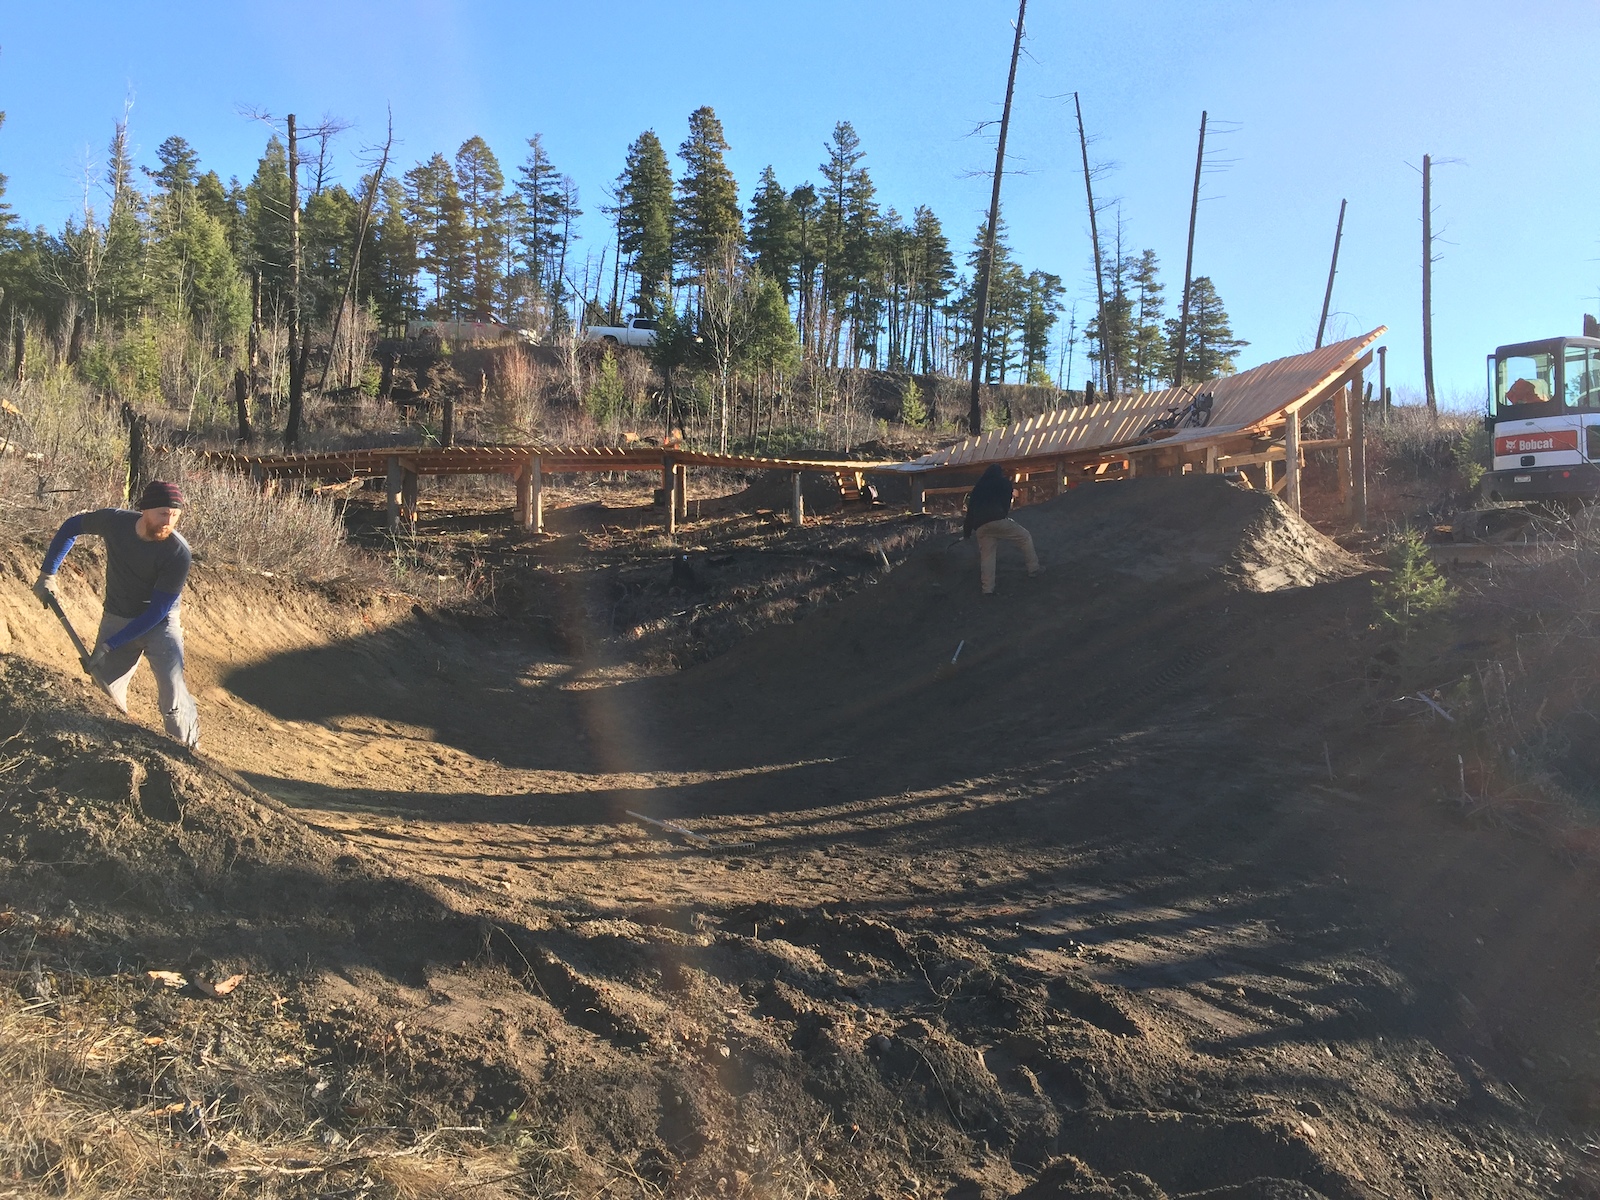 "The Seperator" technical trail feature is finally completed. Big structure, lots of lumber, lots of work but super fun. Splits the trail into two lines. Option 1, gap jump, takes you into a sweet gully and option 2, wallride, takes you along a few hip jumps and a bench cut trail section.